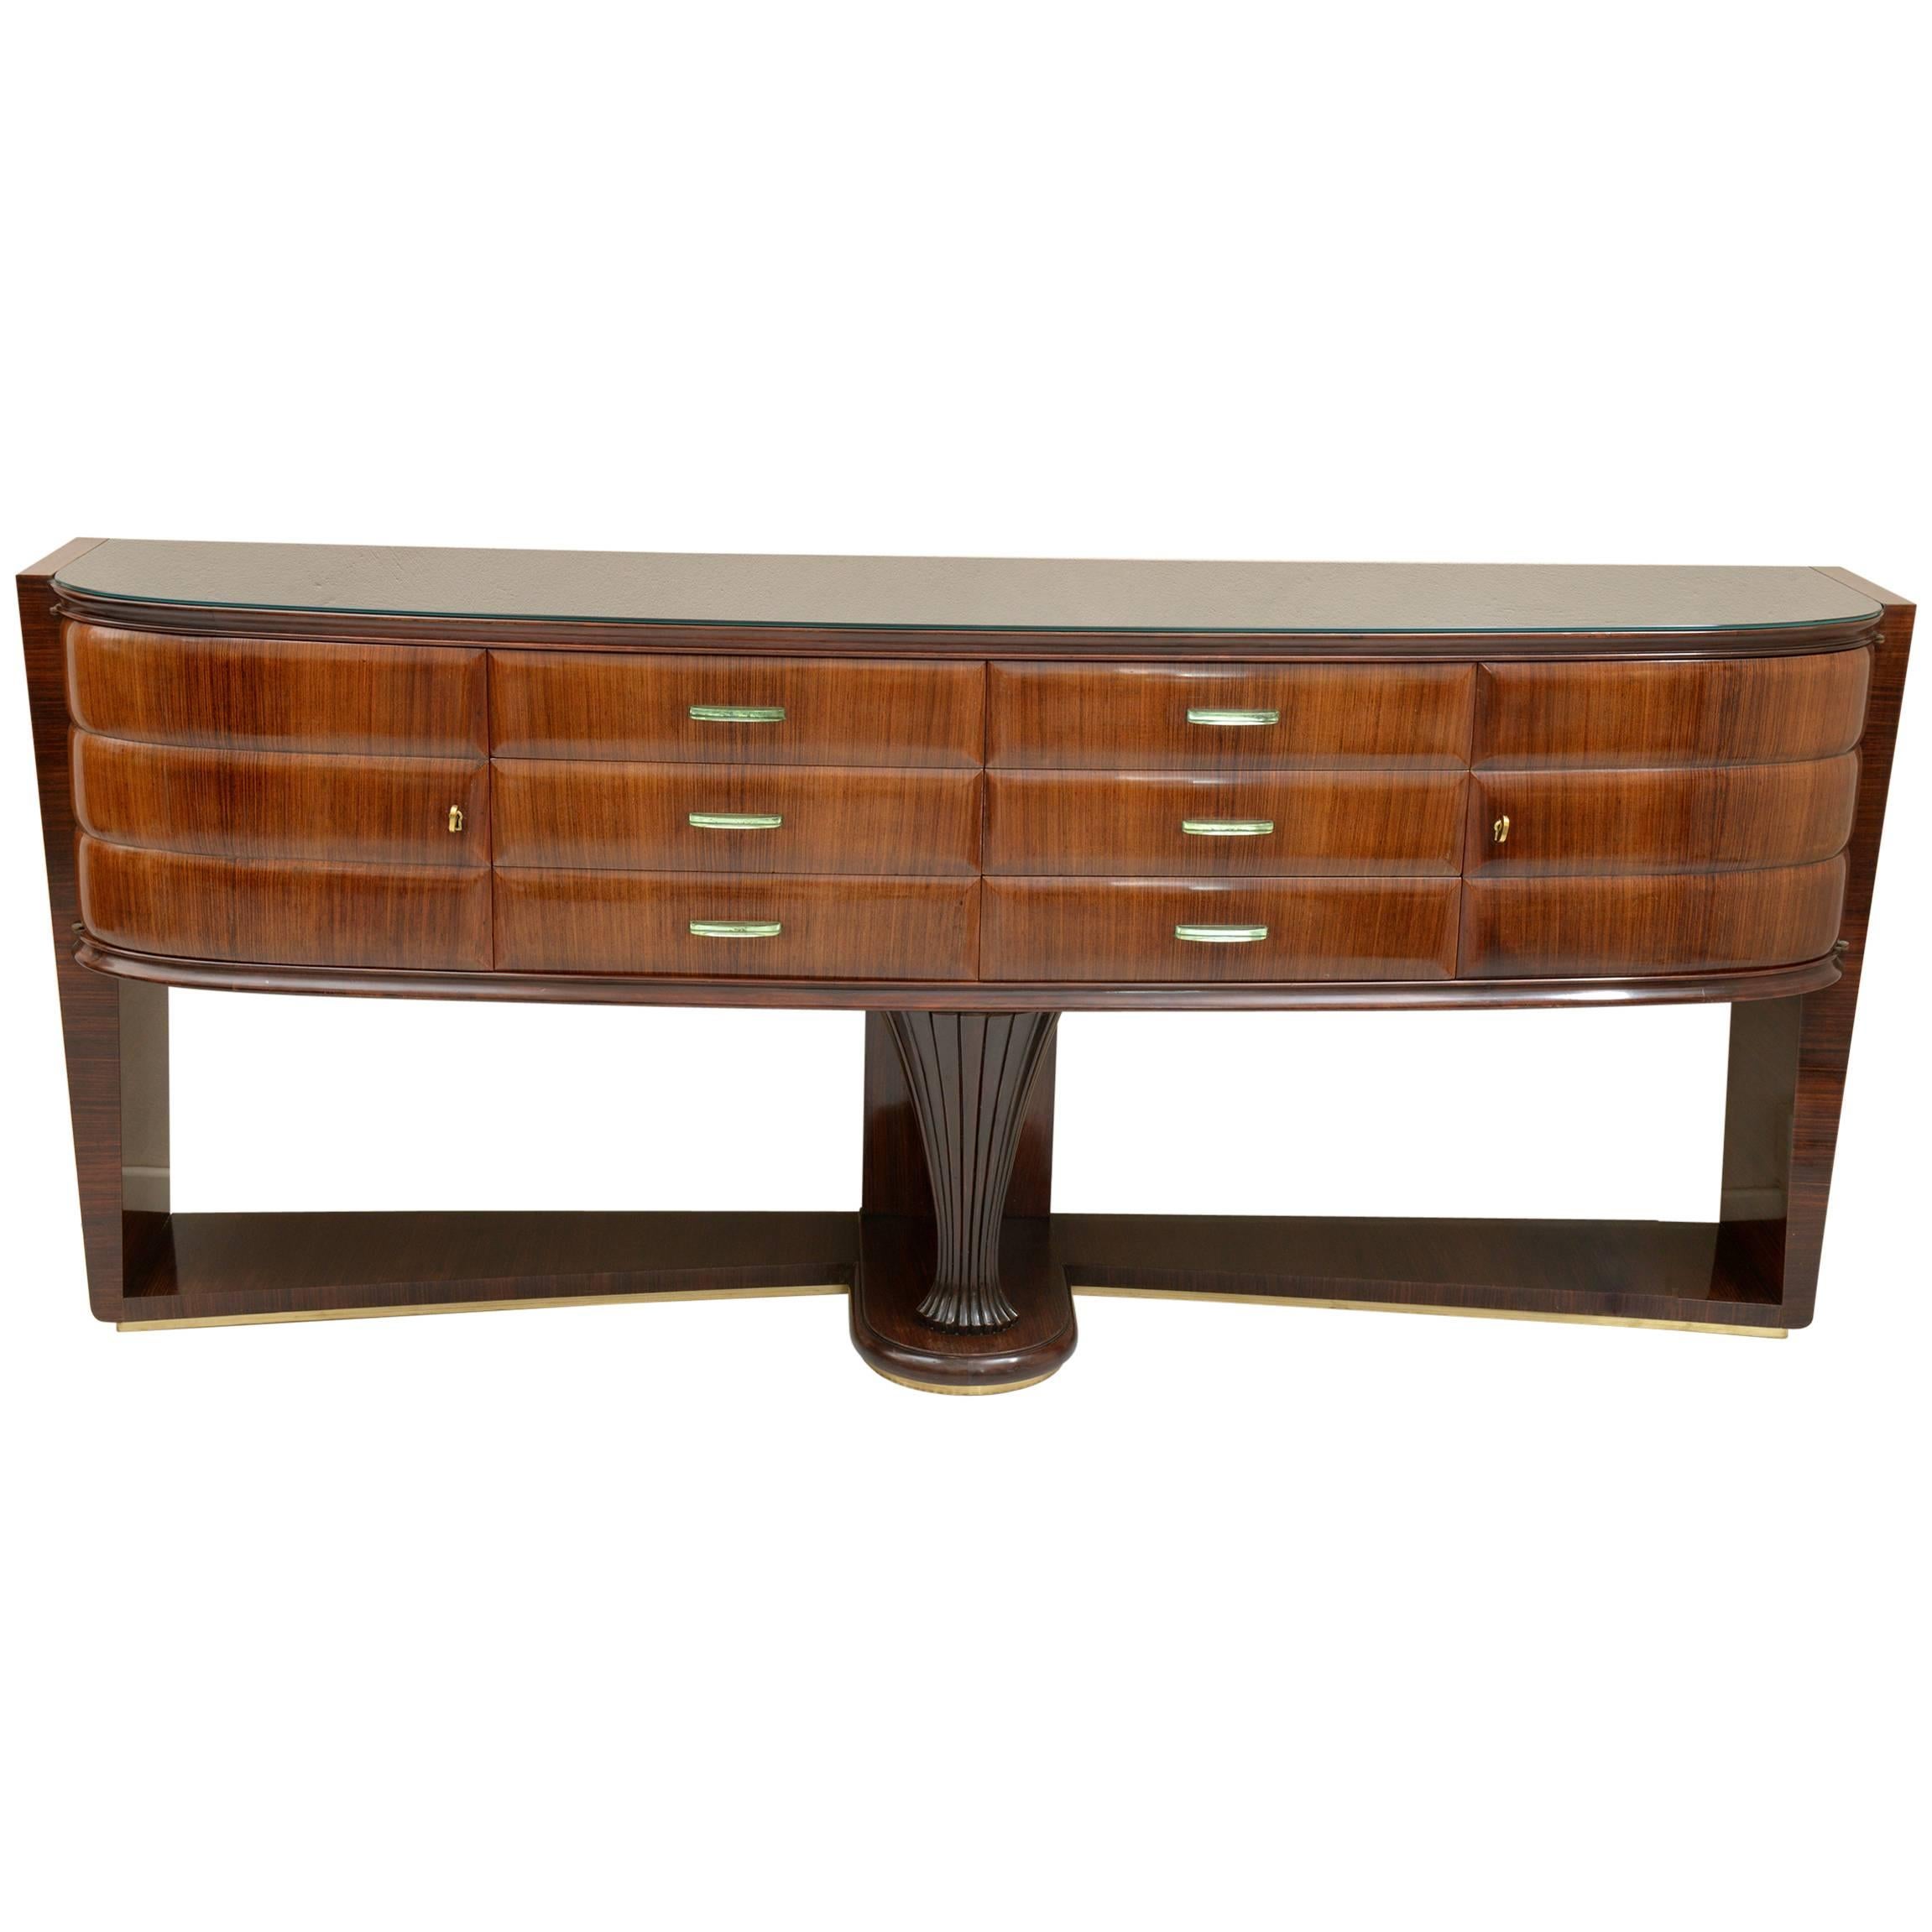 Elegant Italian, 1930s Demilune Cristal Handles Consolle-Sideboard by Dassi